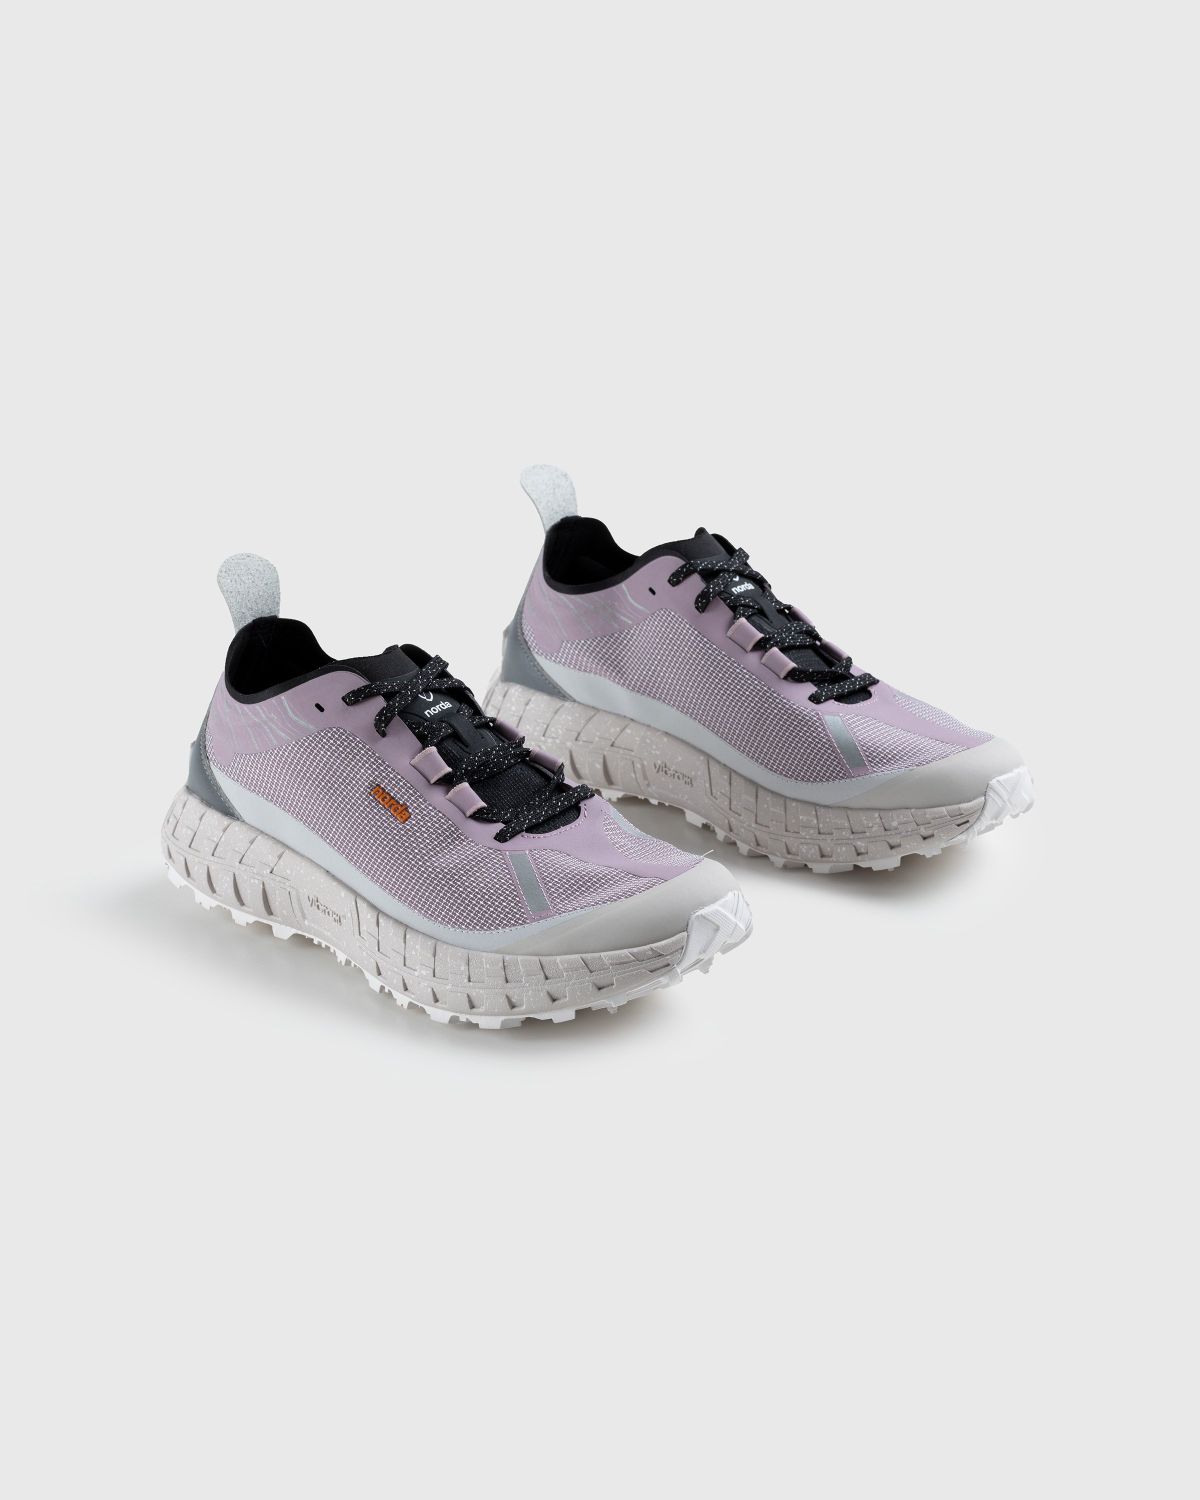 Norda – 001 W LTD Edition Lilac - Low Top Sneakers - Purple - Image 3